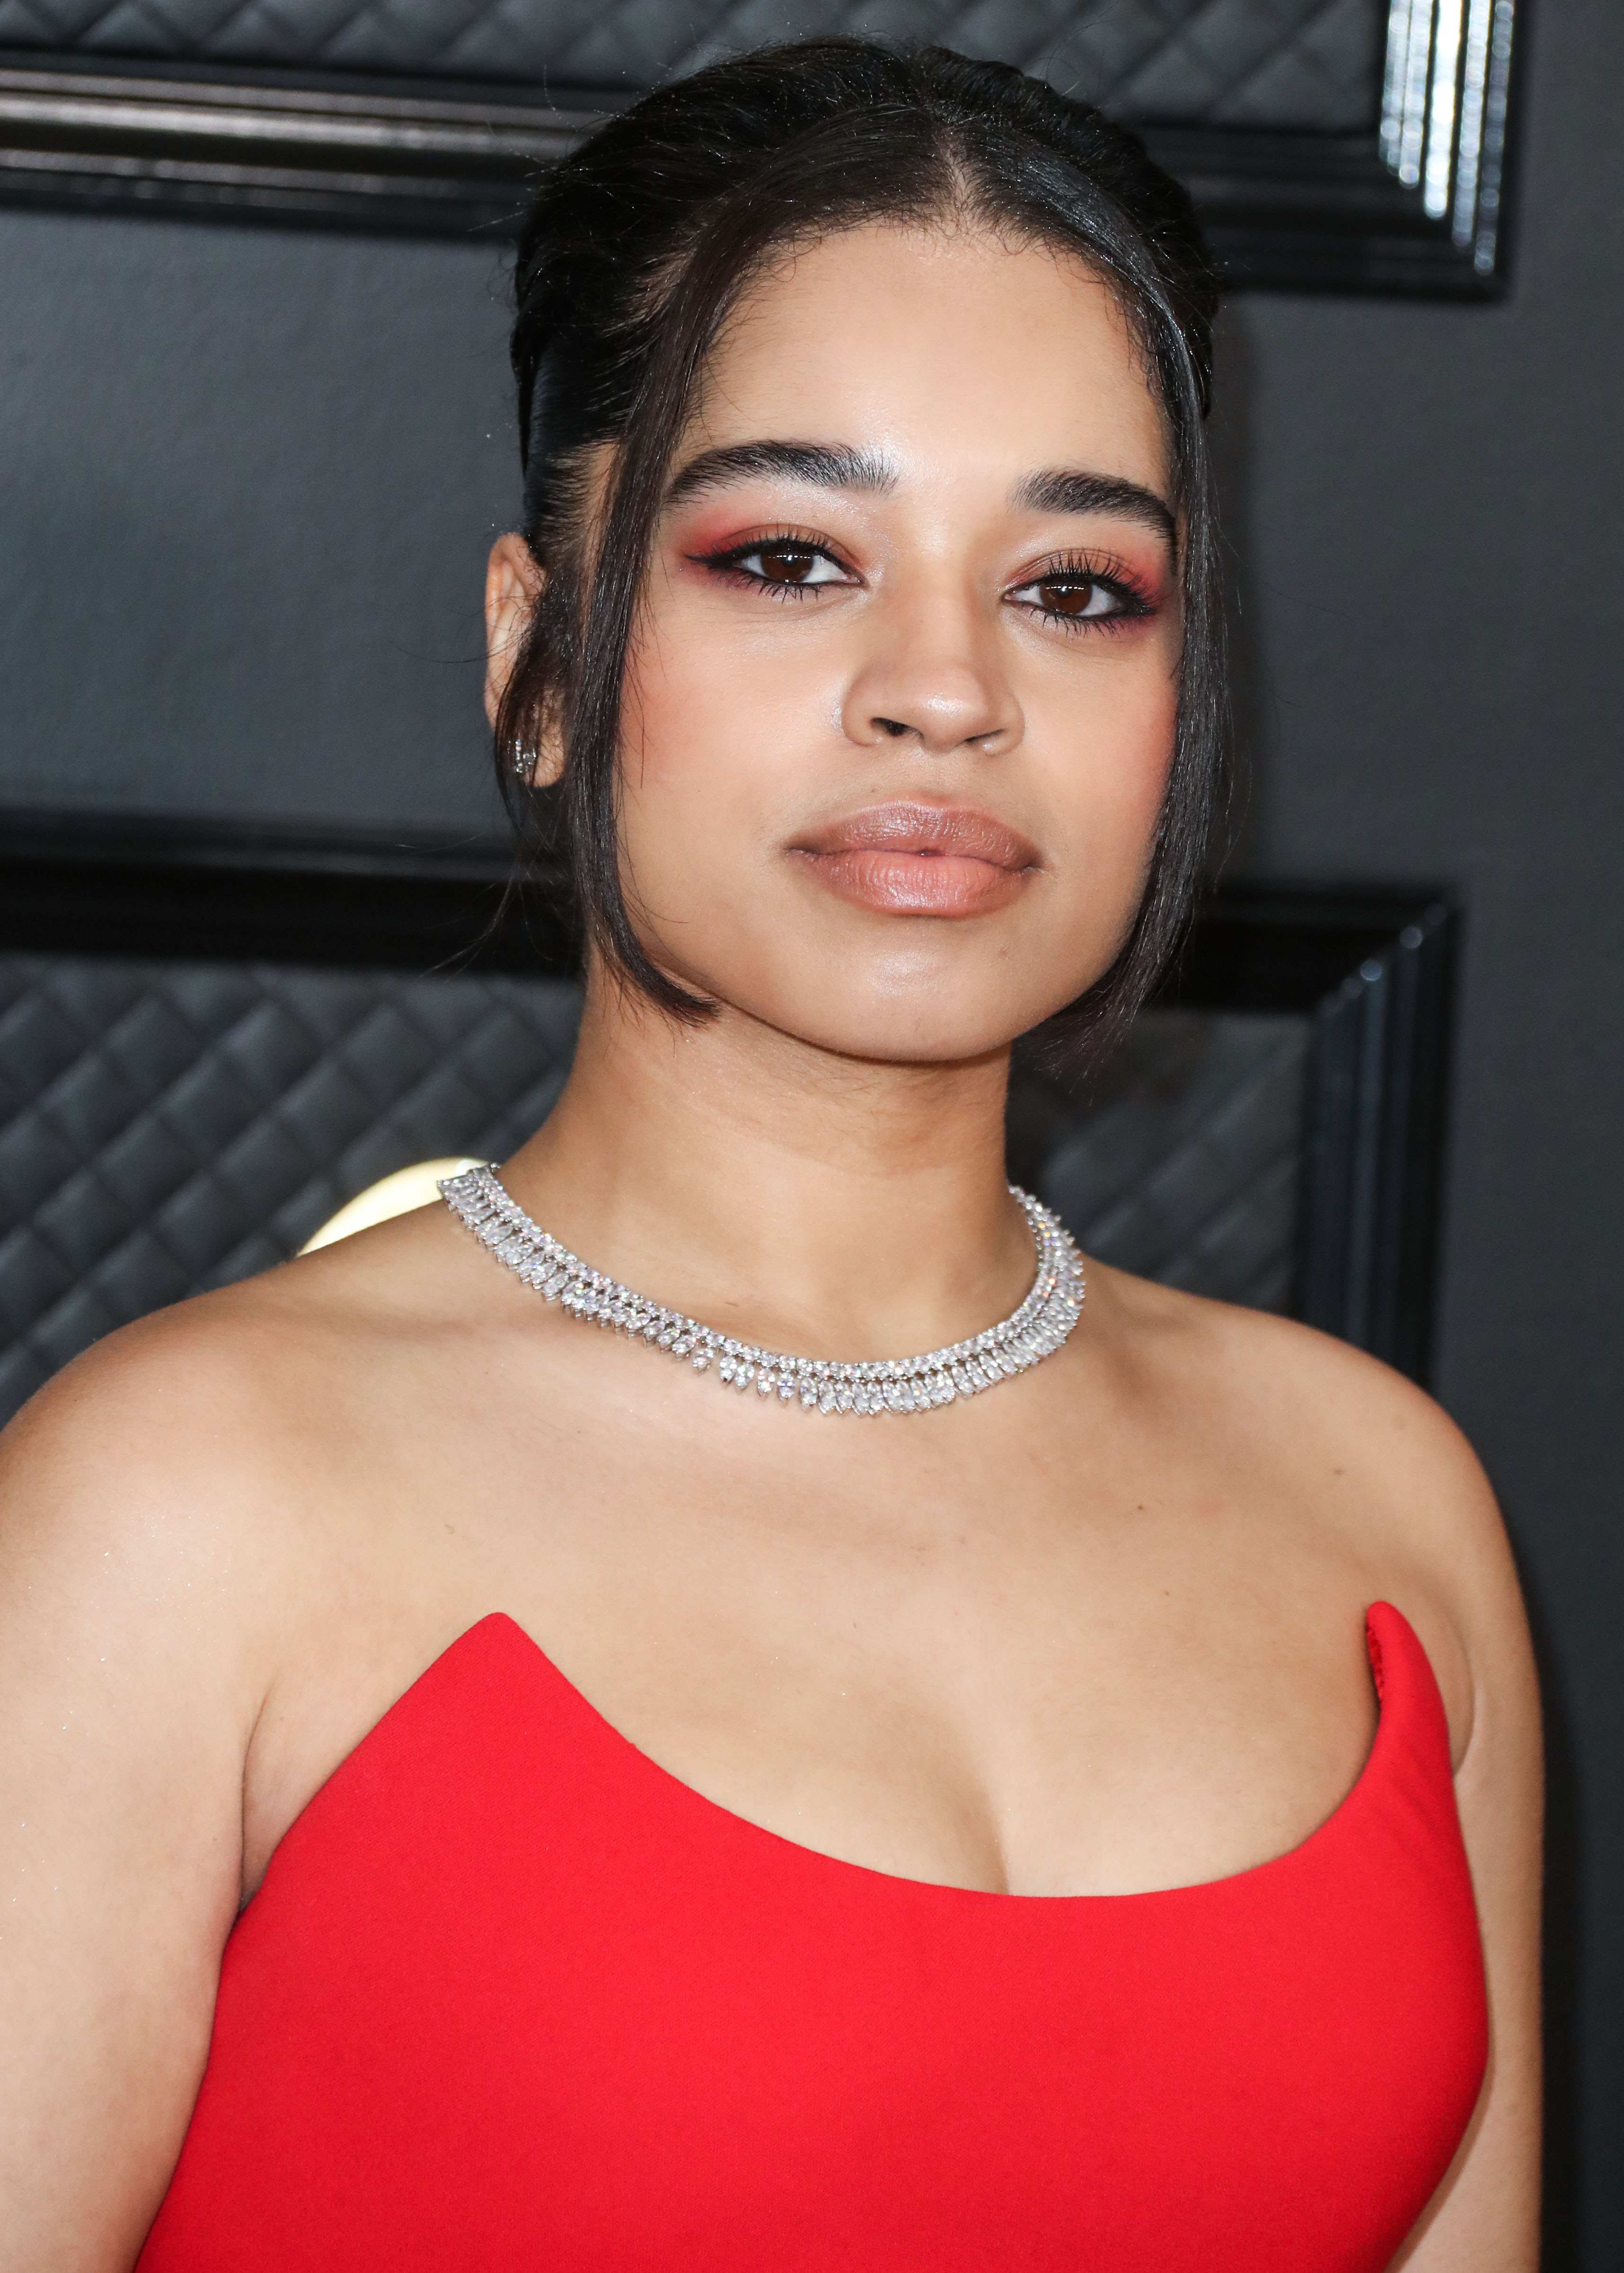 Ella Mai arrives at the 62nd Annual GRAMMY Awards held at Staples Center on January 26, 2020 in Los Angeles, California, United States.